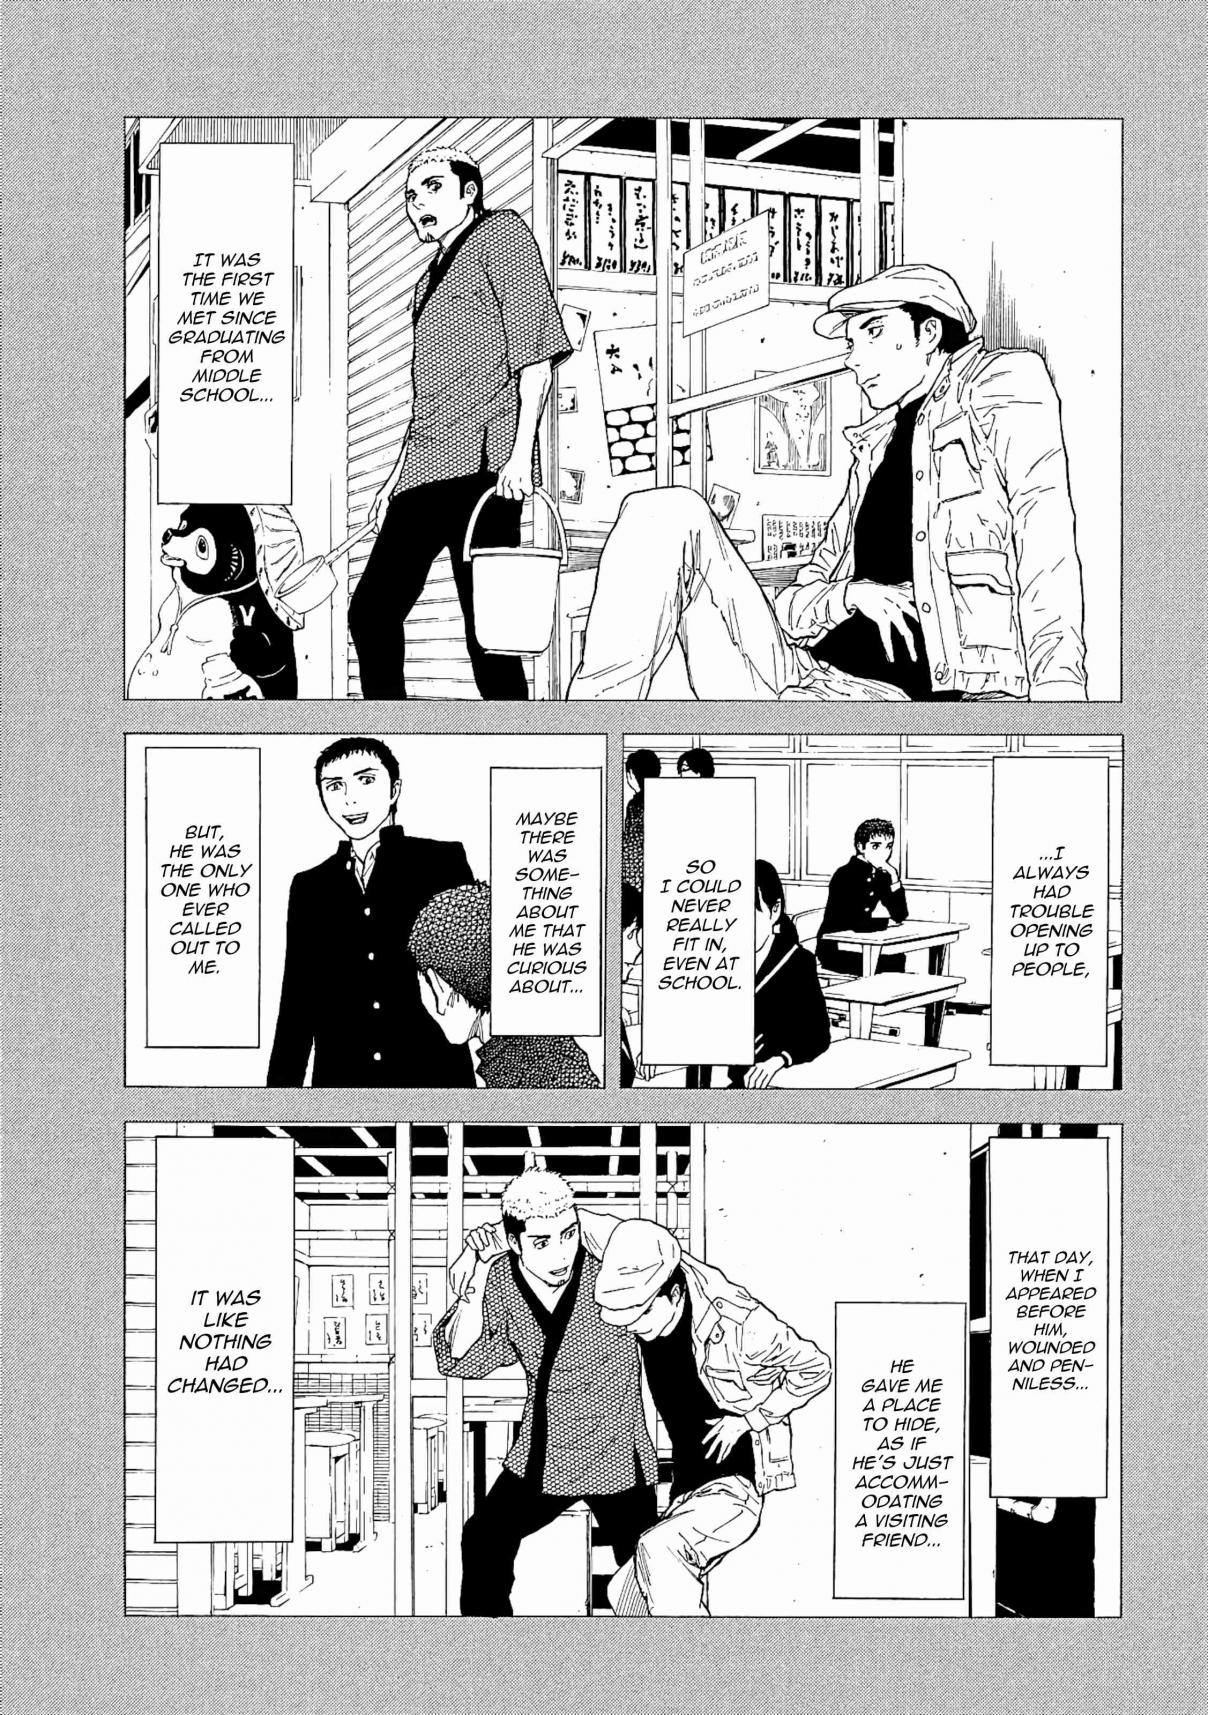 My Home Hero Vol. 7 Ch. 58 The Last of a Friend